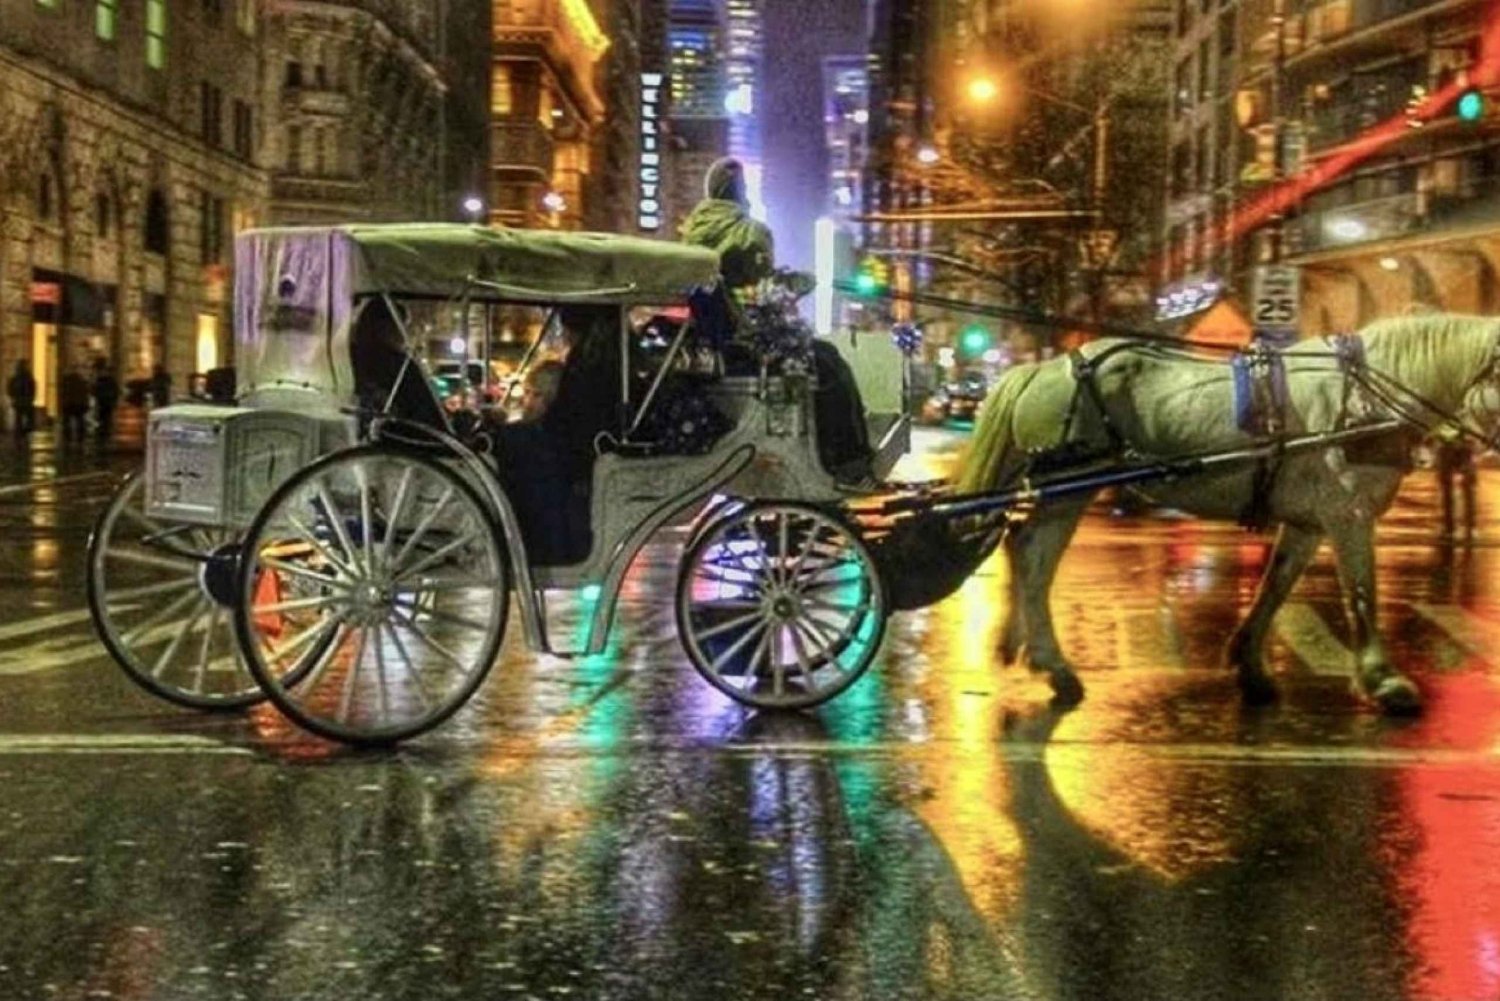 NYC MAGICAL NIGHT TIME RIDE Central Park/Rockefeller Center